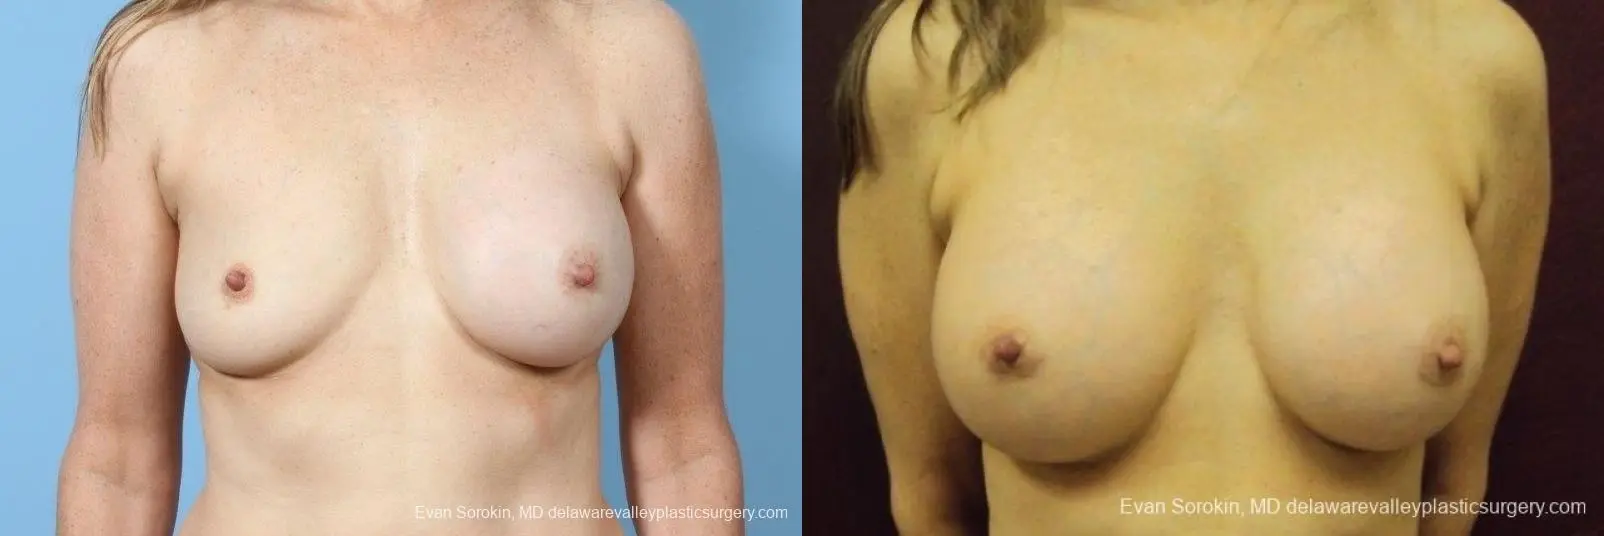 Philadelphia Breast Augmentation 8708 - Before and After 1